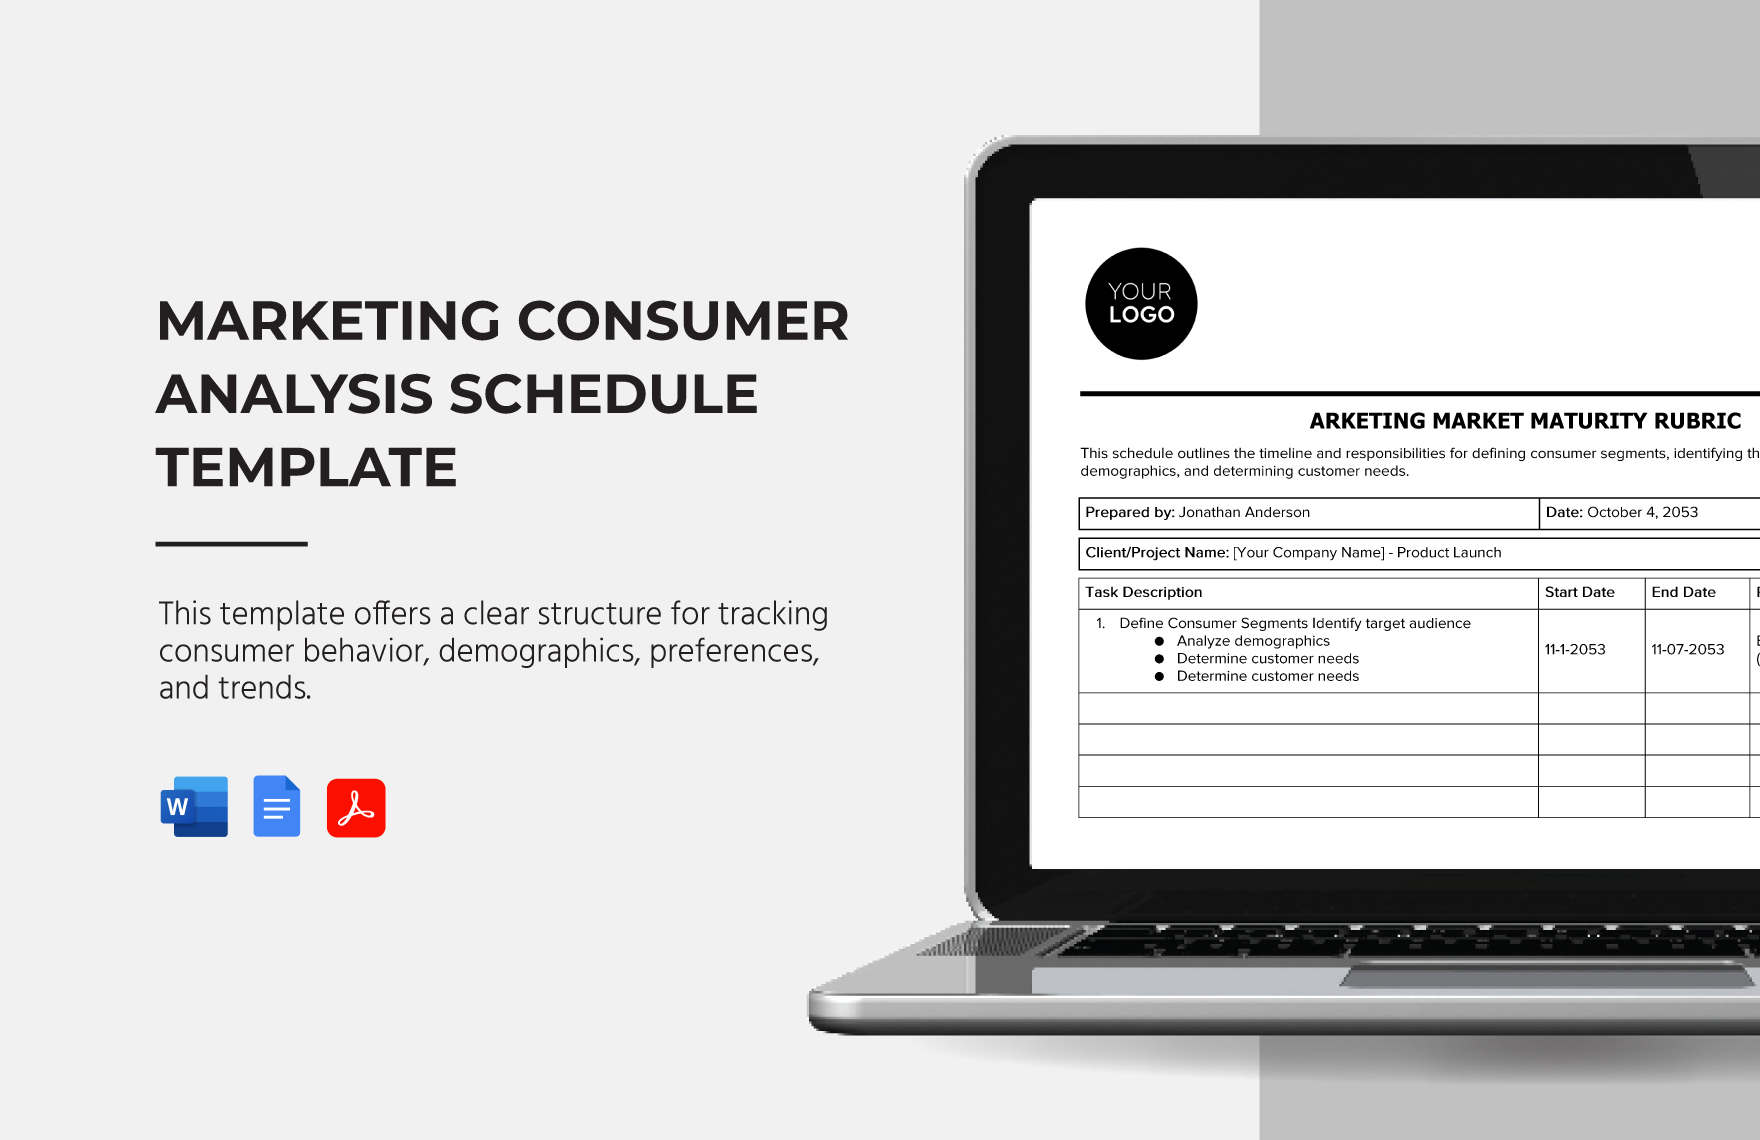 Marketing Consumer Analysis Schedule Template in Word, Google Docs, PDF